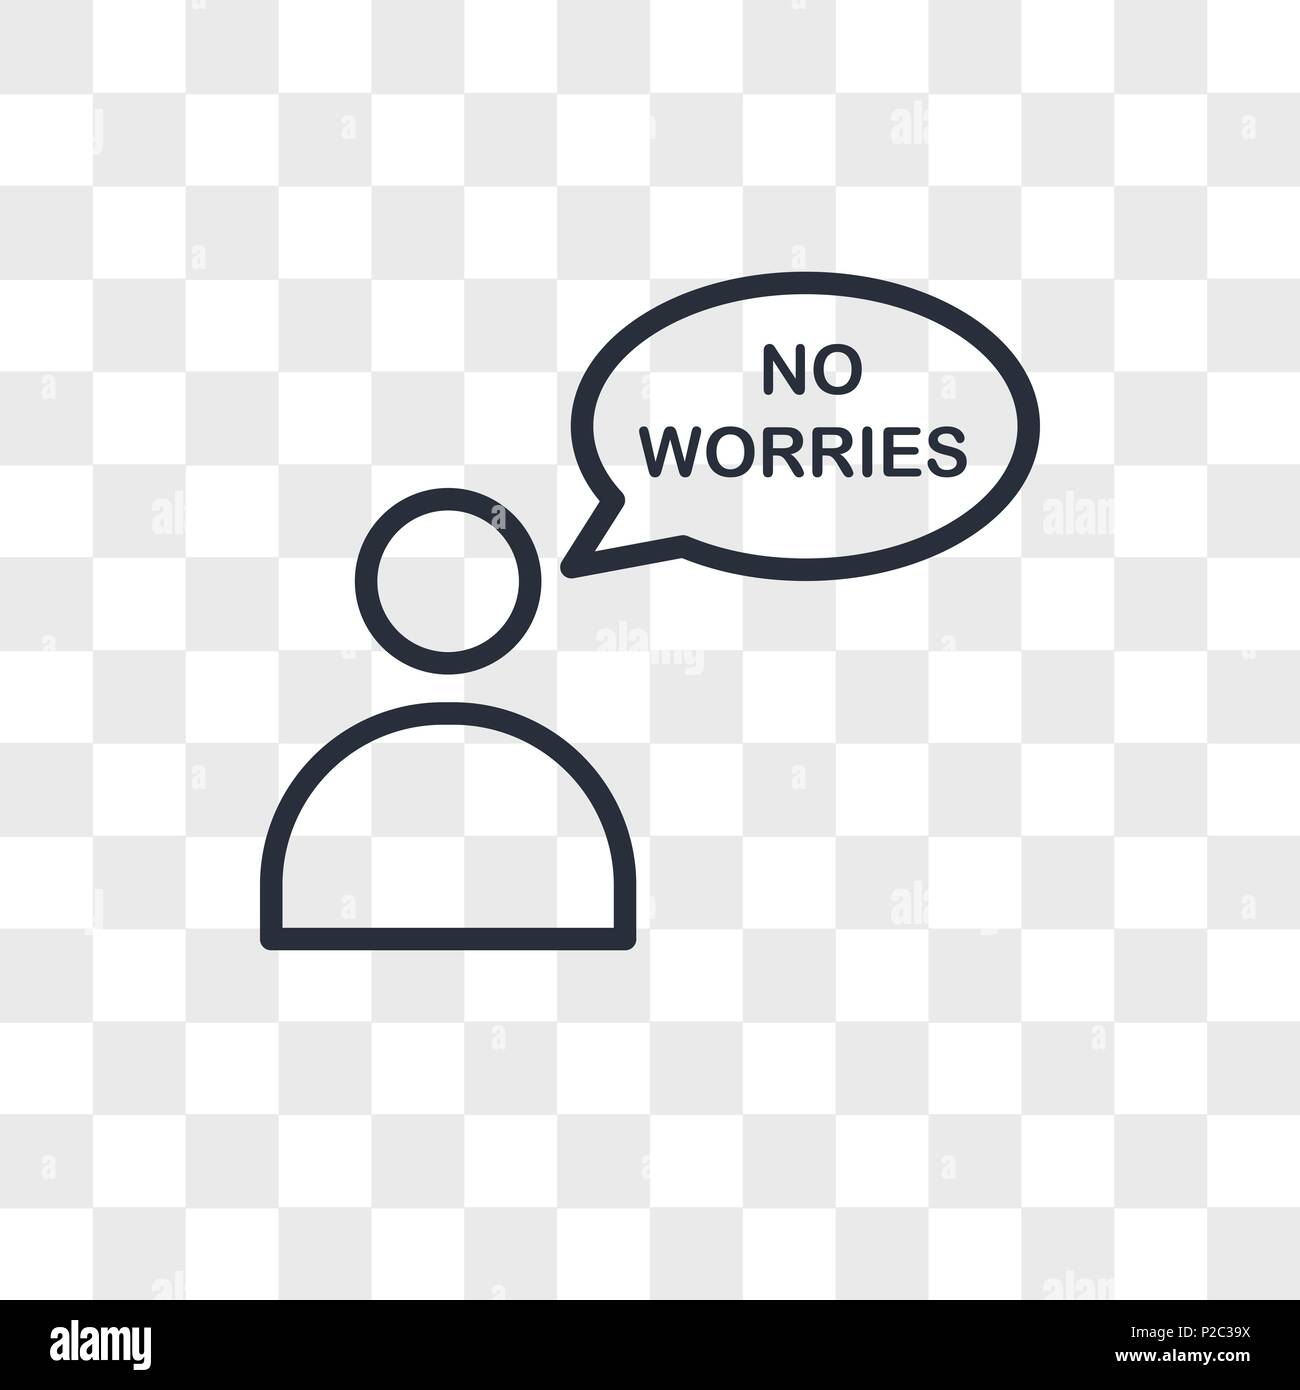 no worries vector icon isolated on transparent background, no worries logo concept Stock Vector